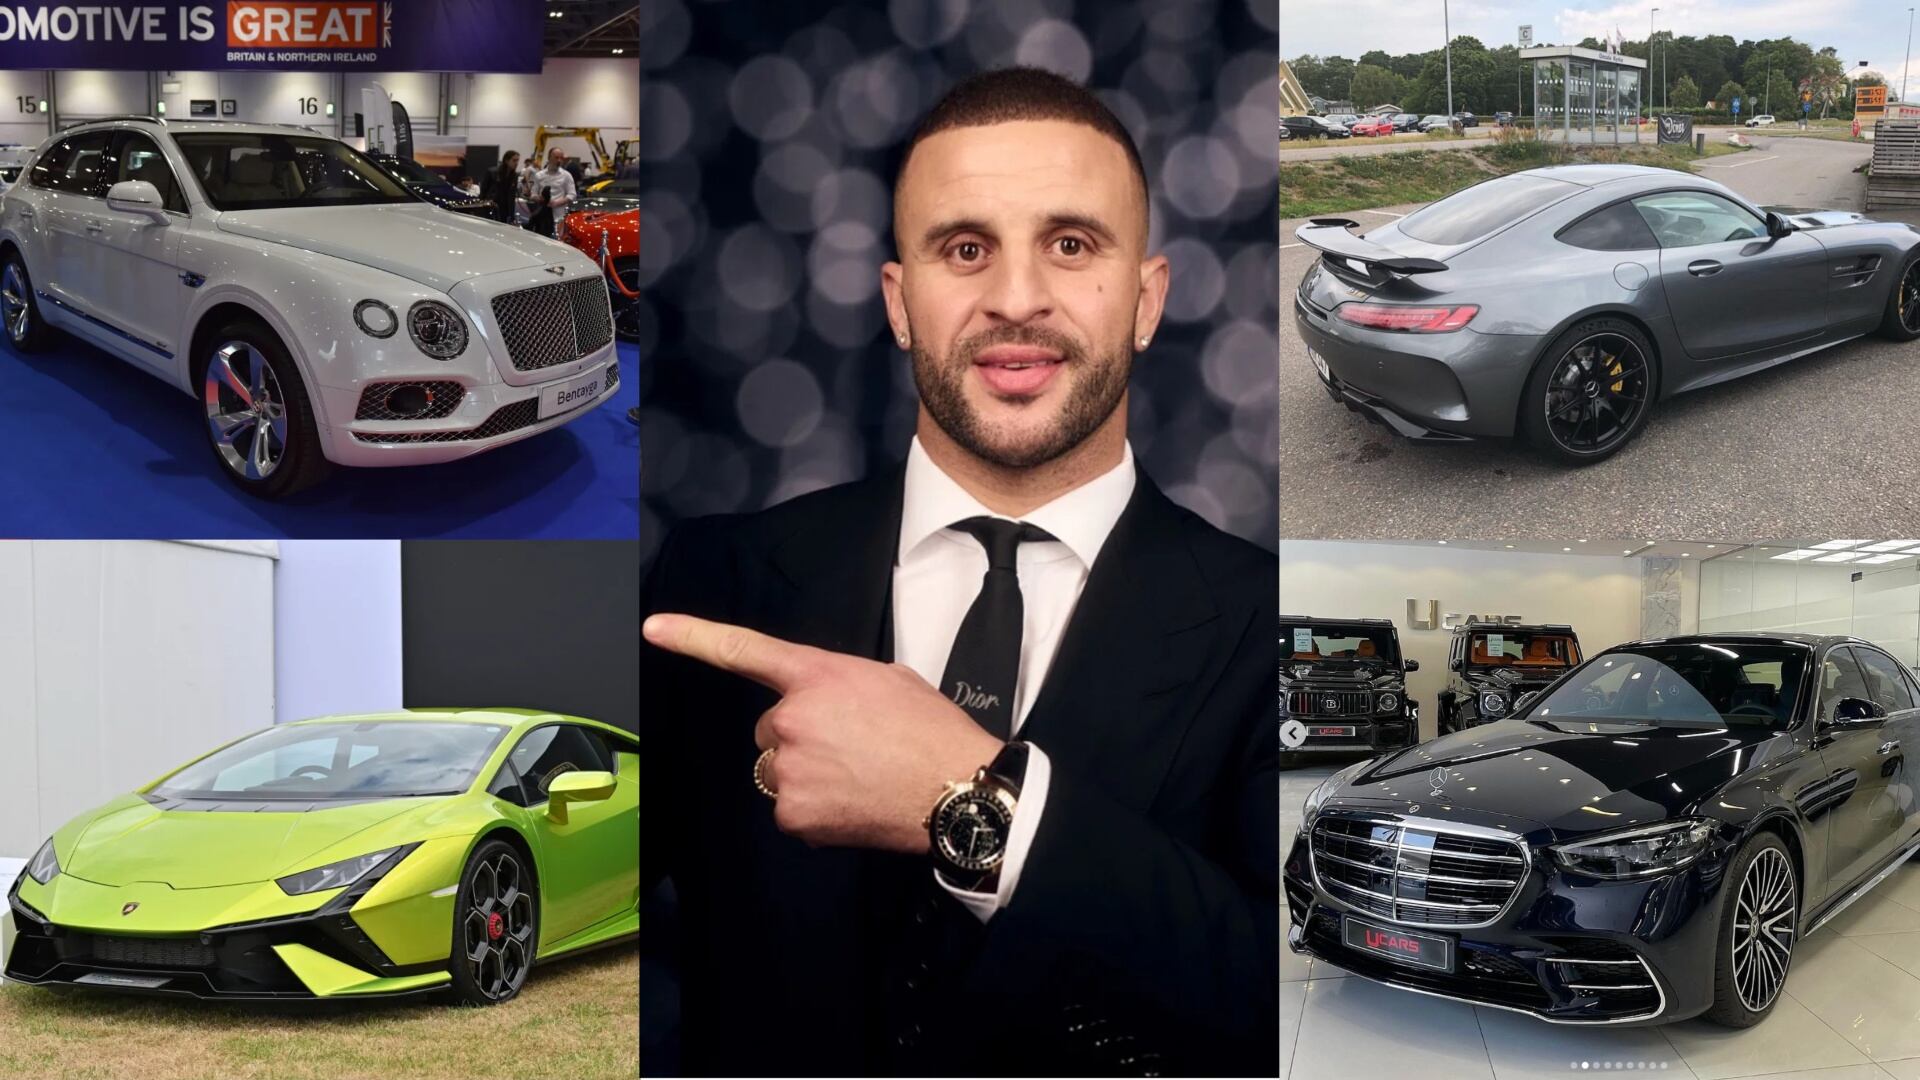 Manchester City's Kyle Walker has a crazy car collection worth thousands